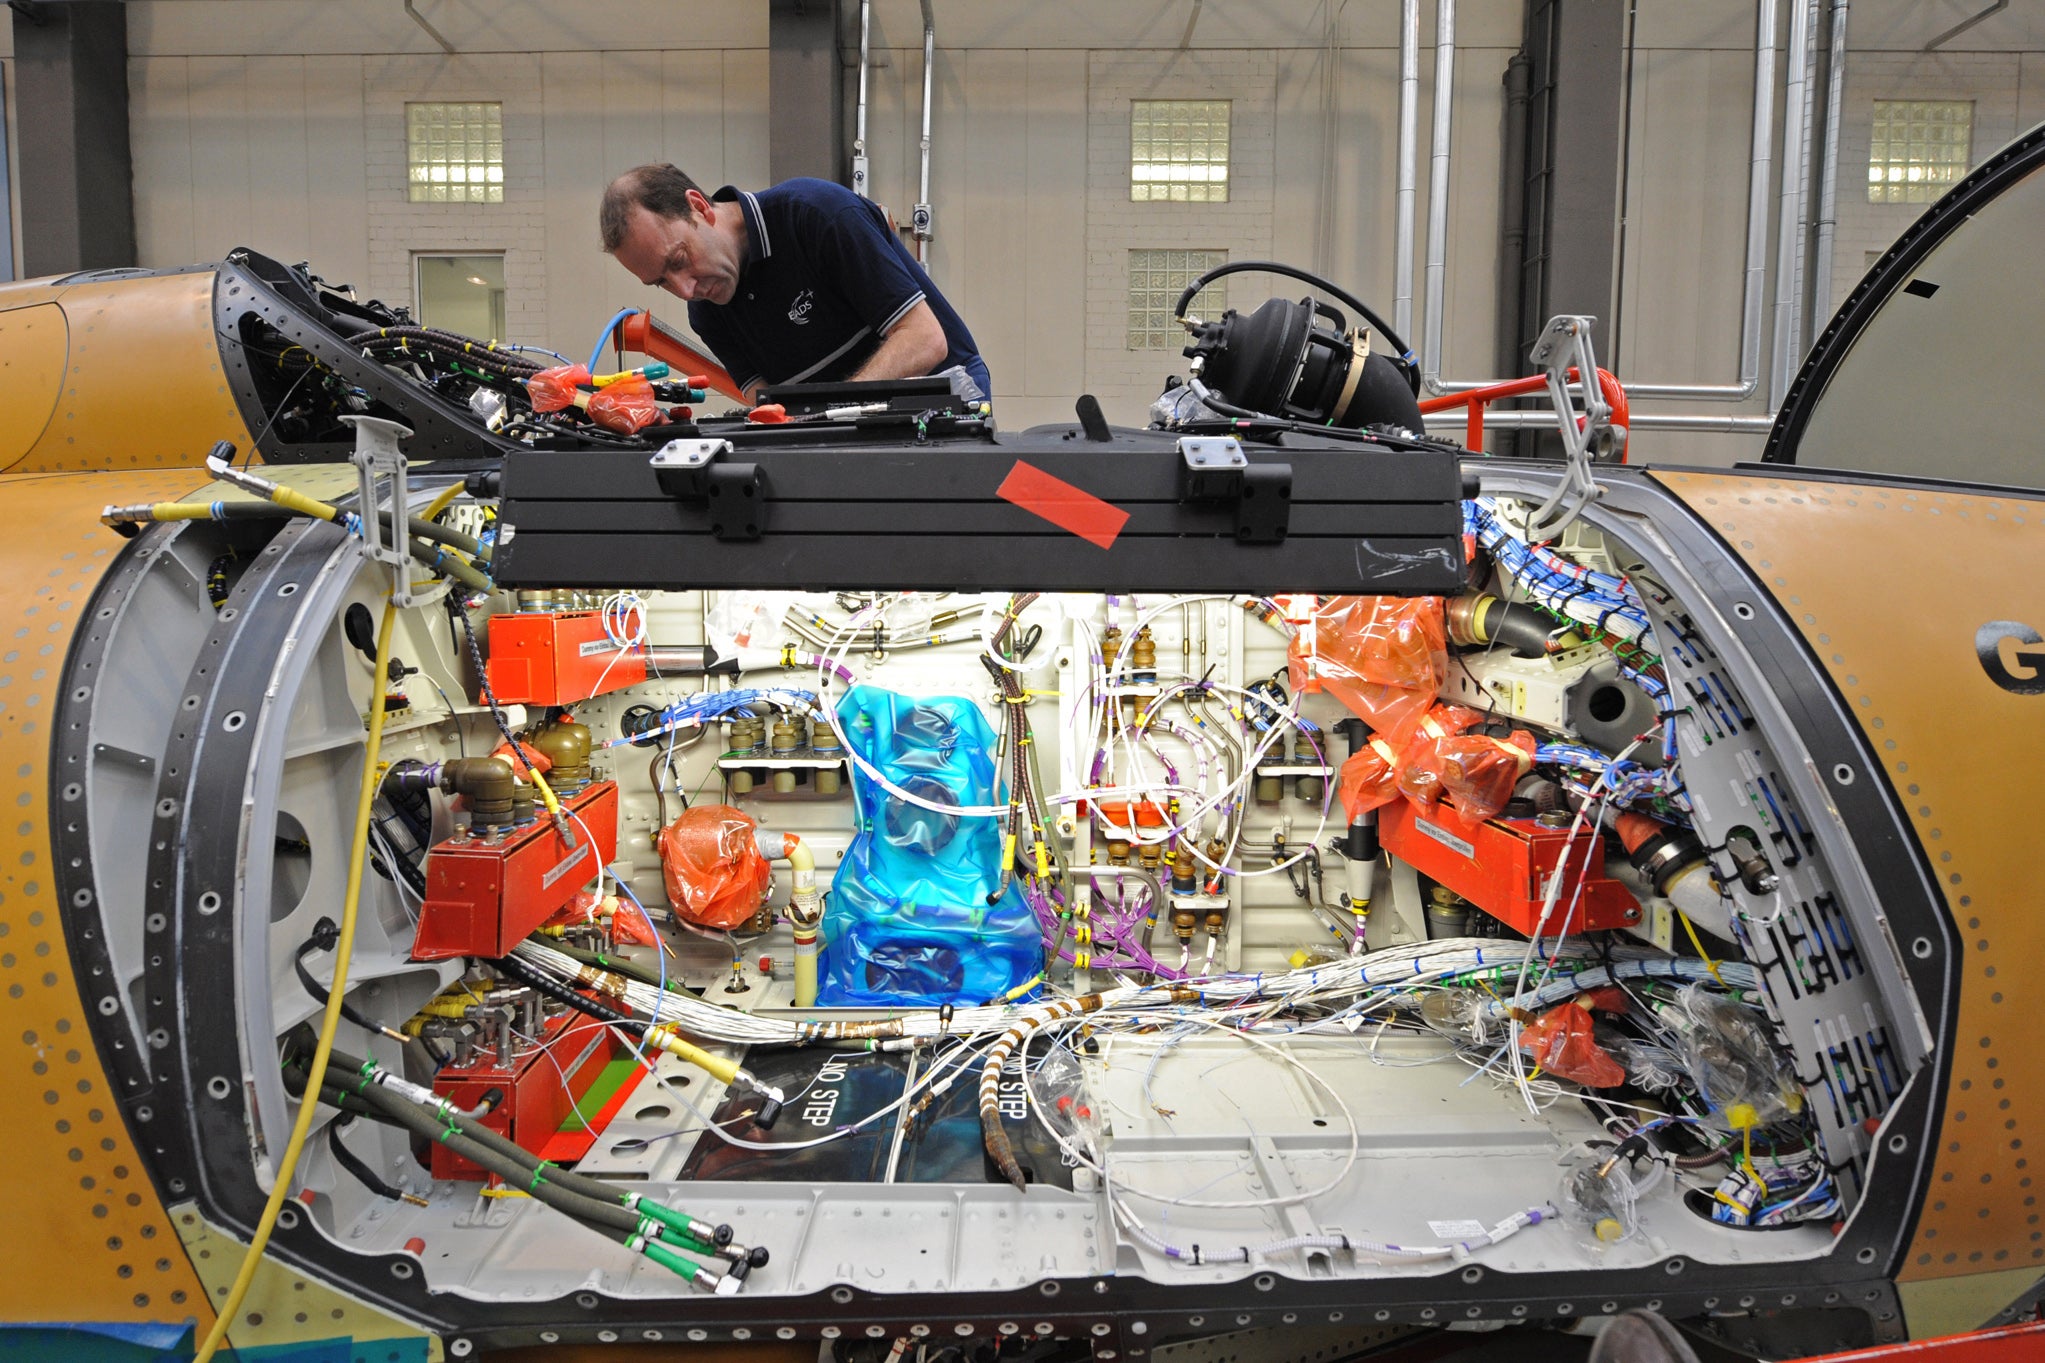 Military aircraft maintainer installing microwave able assemblies.